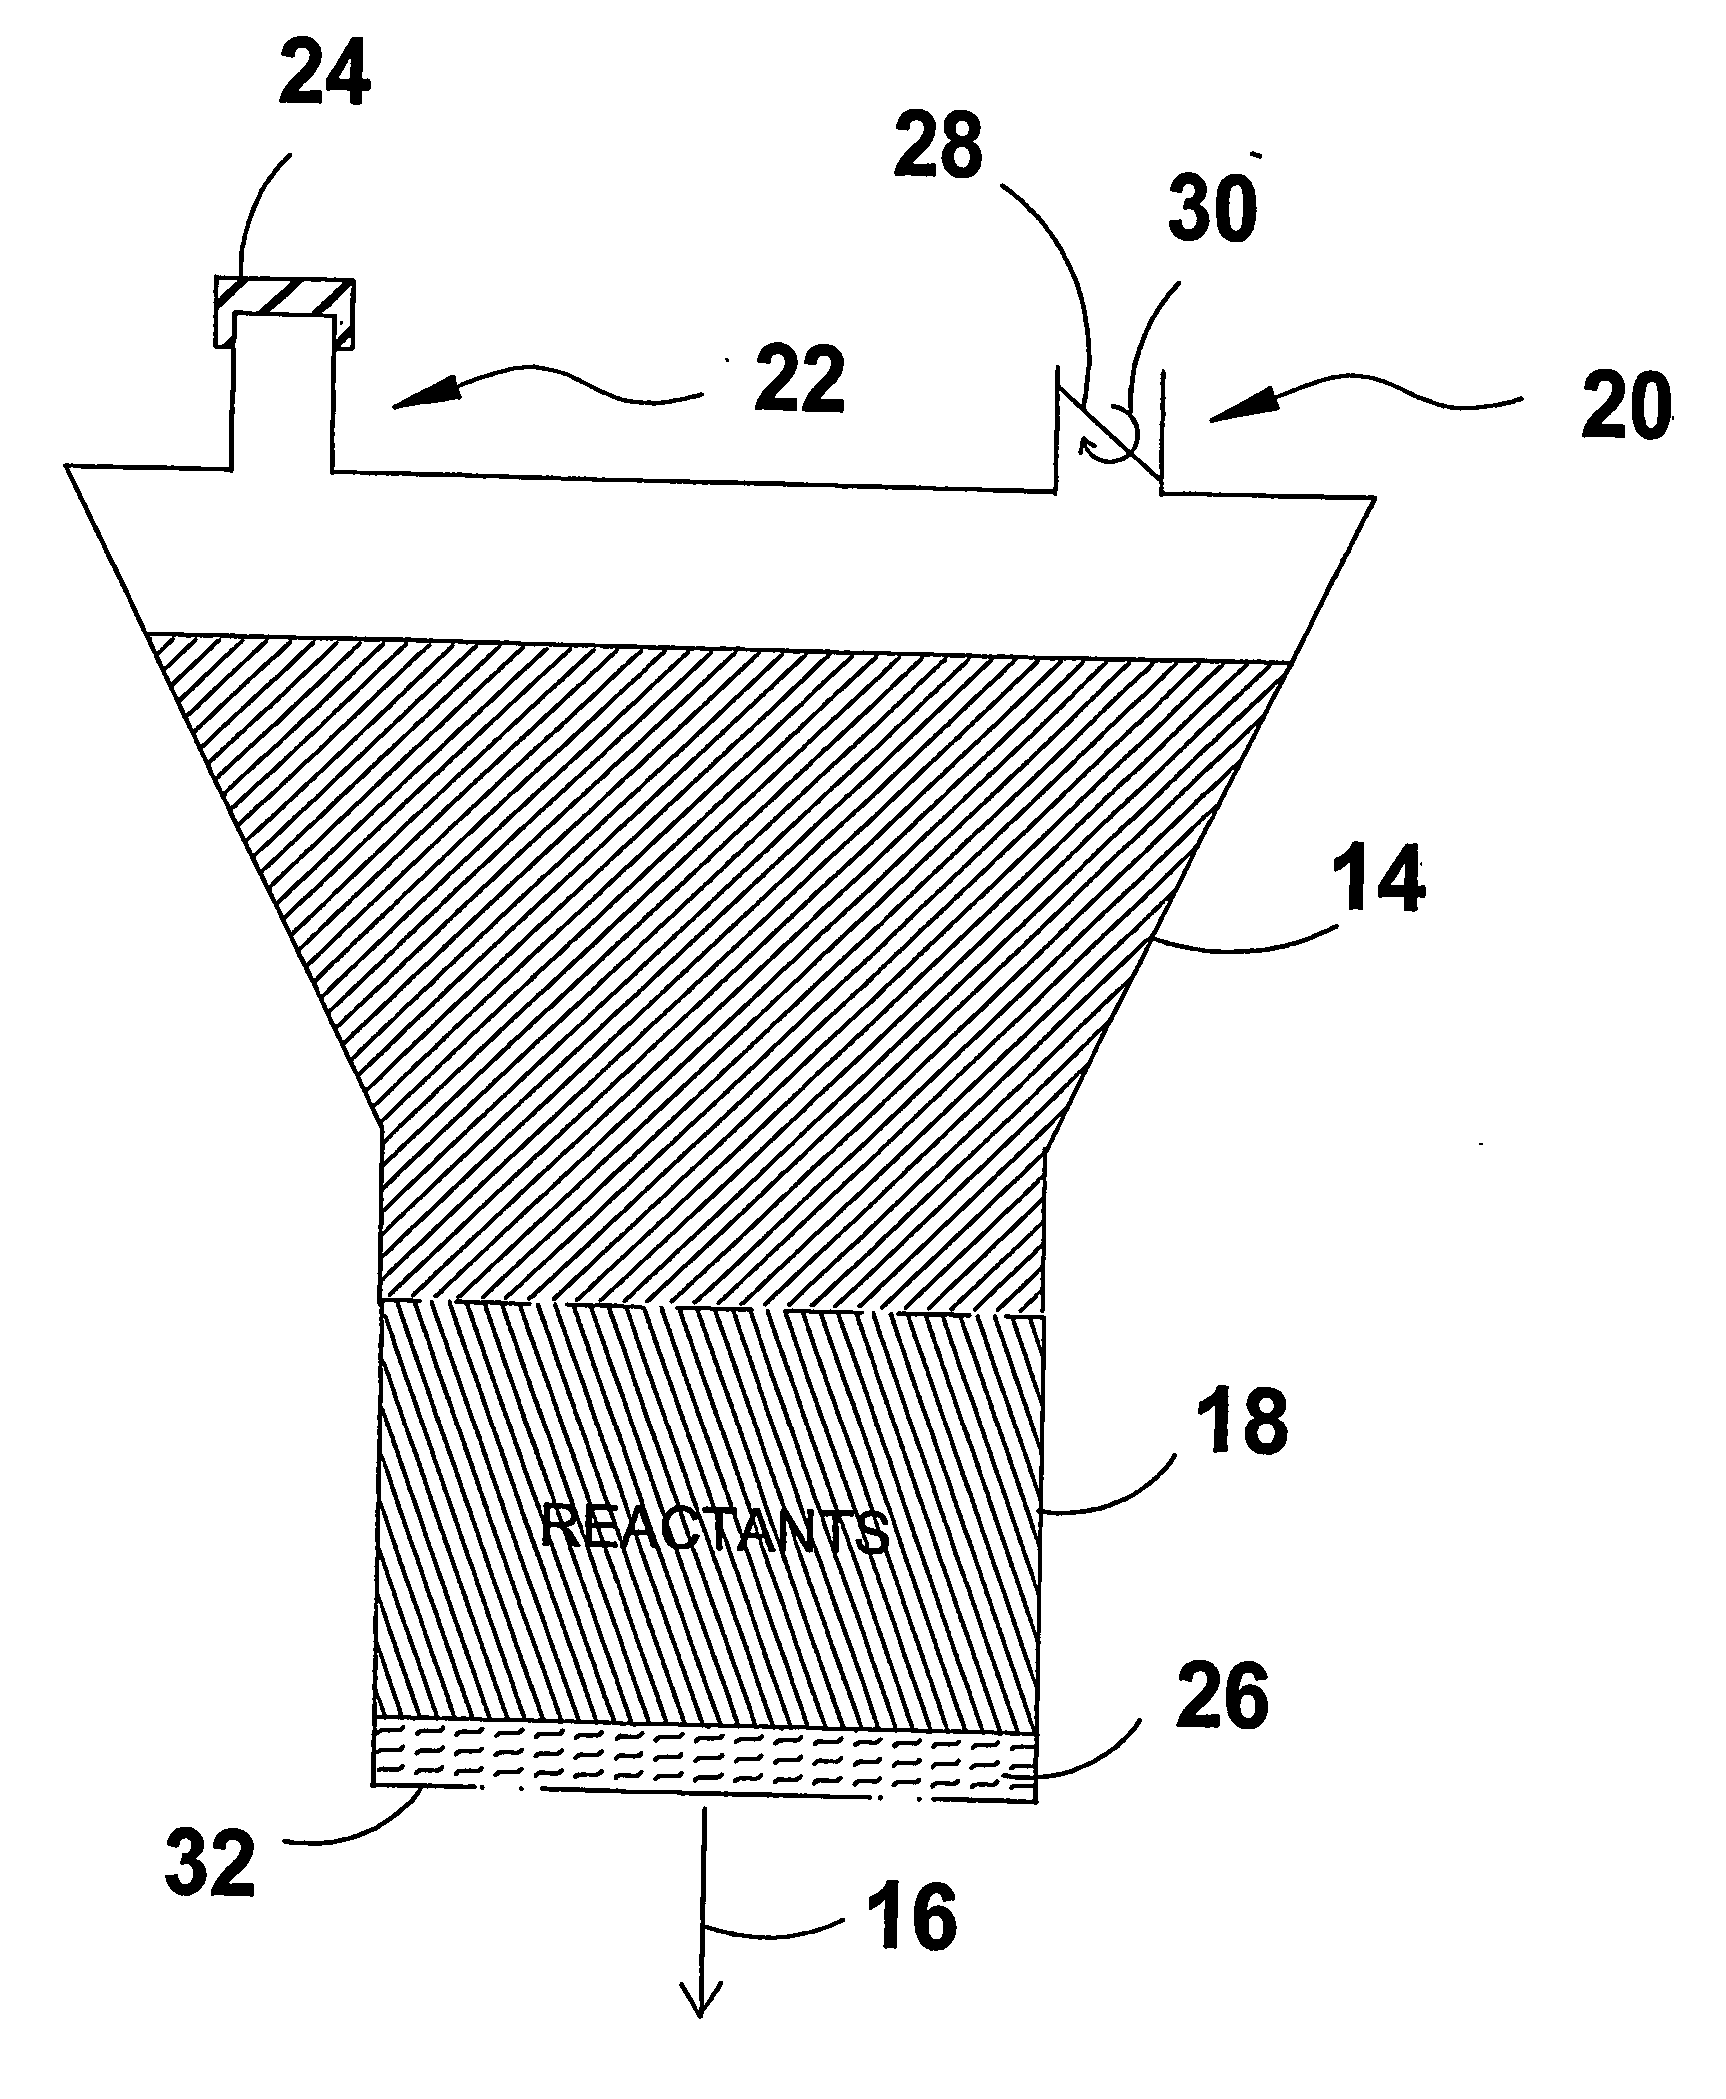 Water conversion device and method